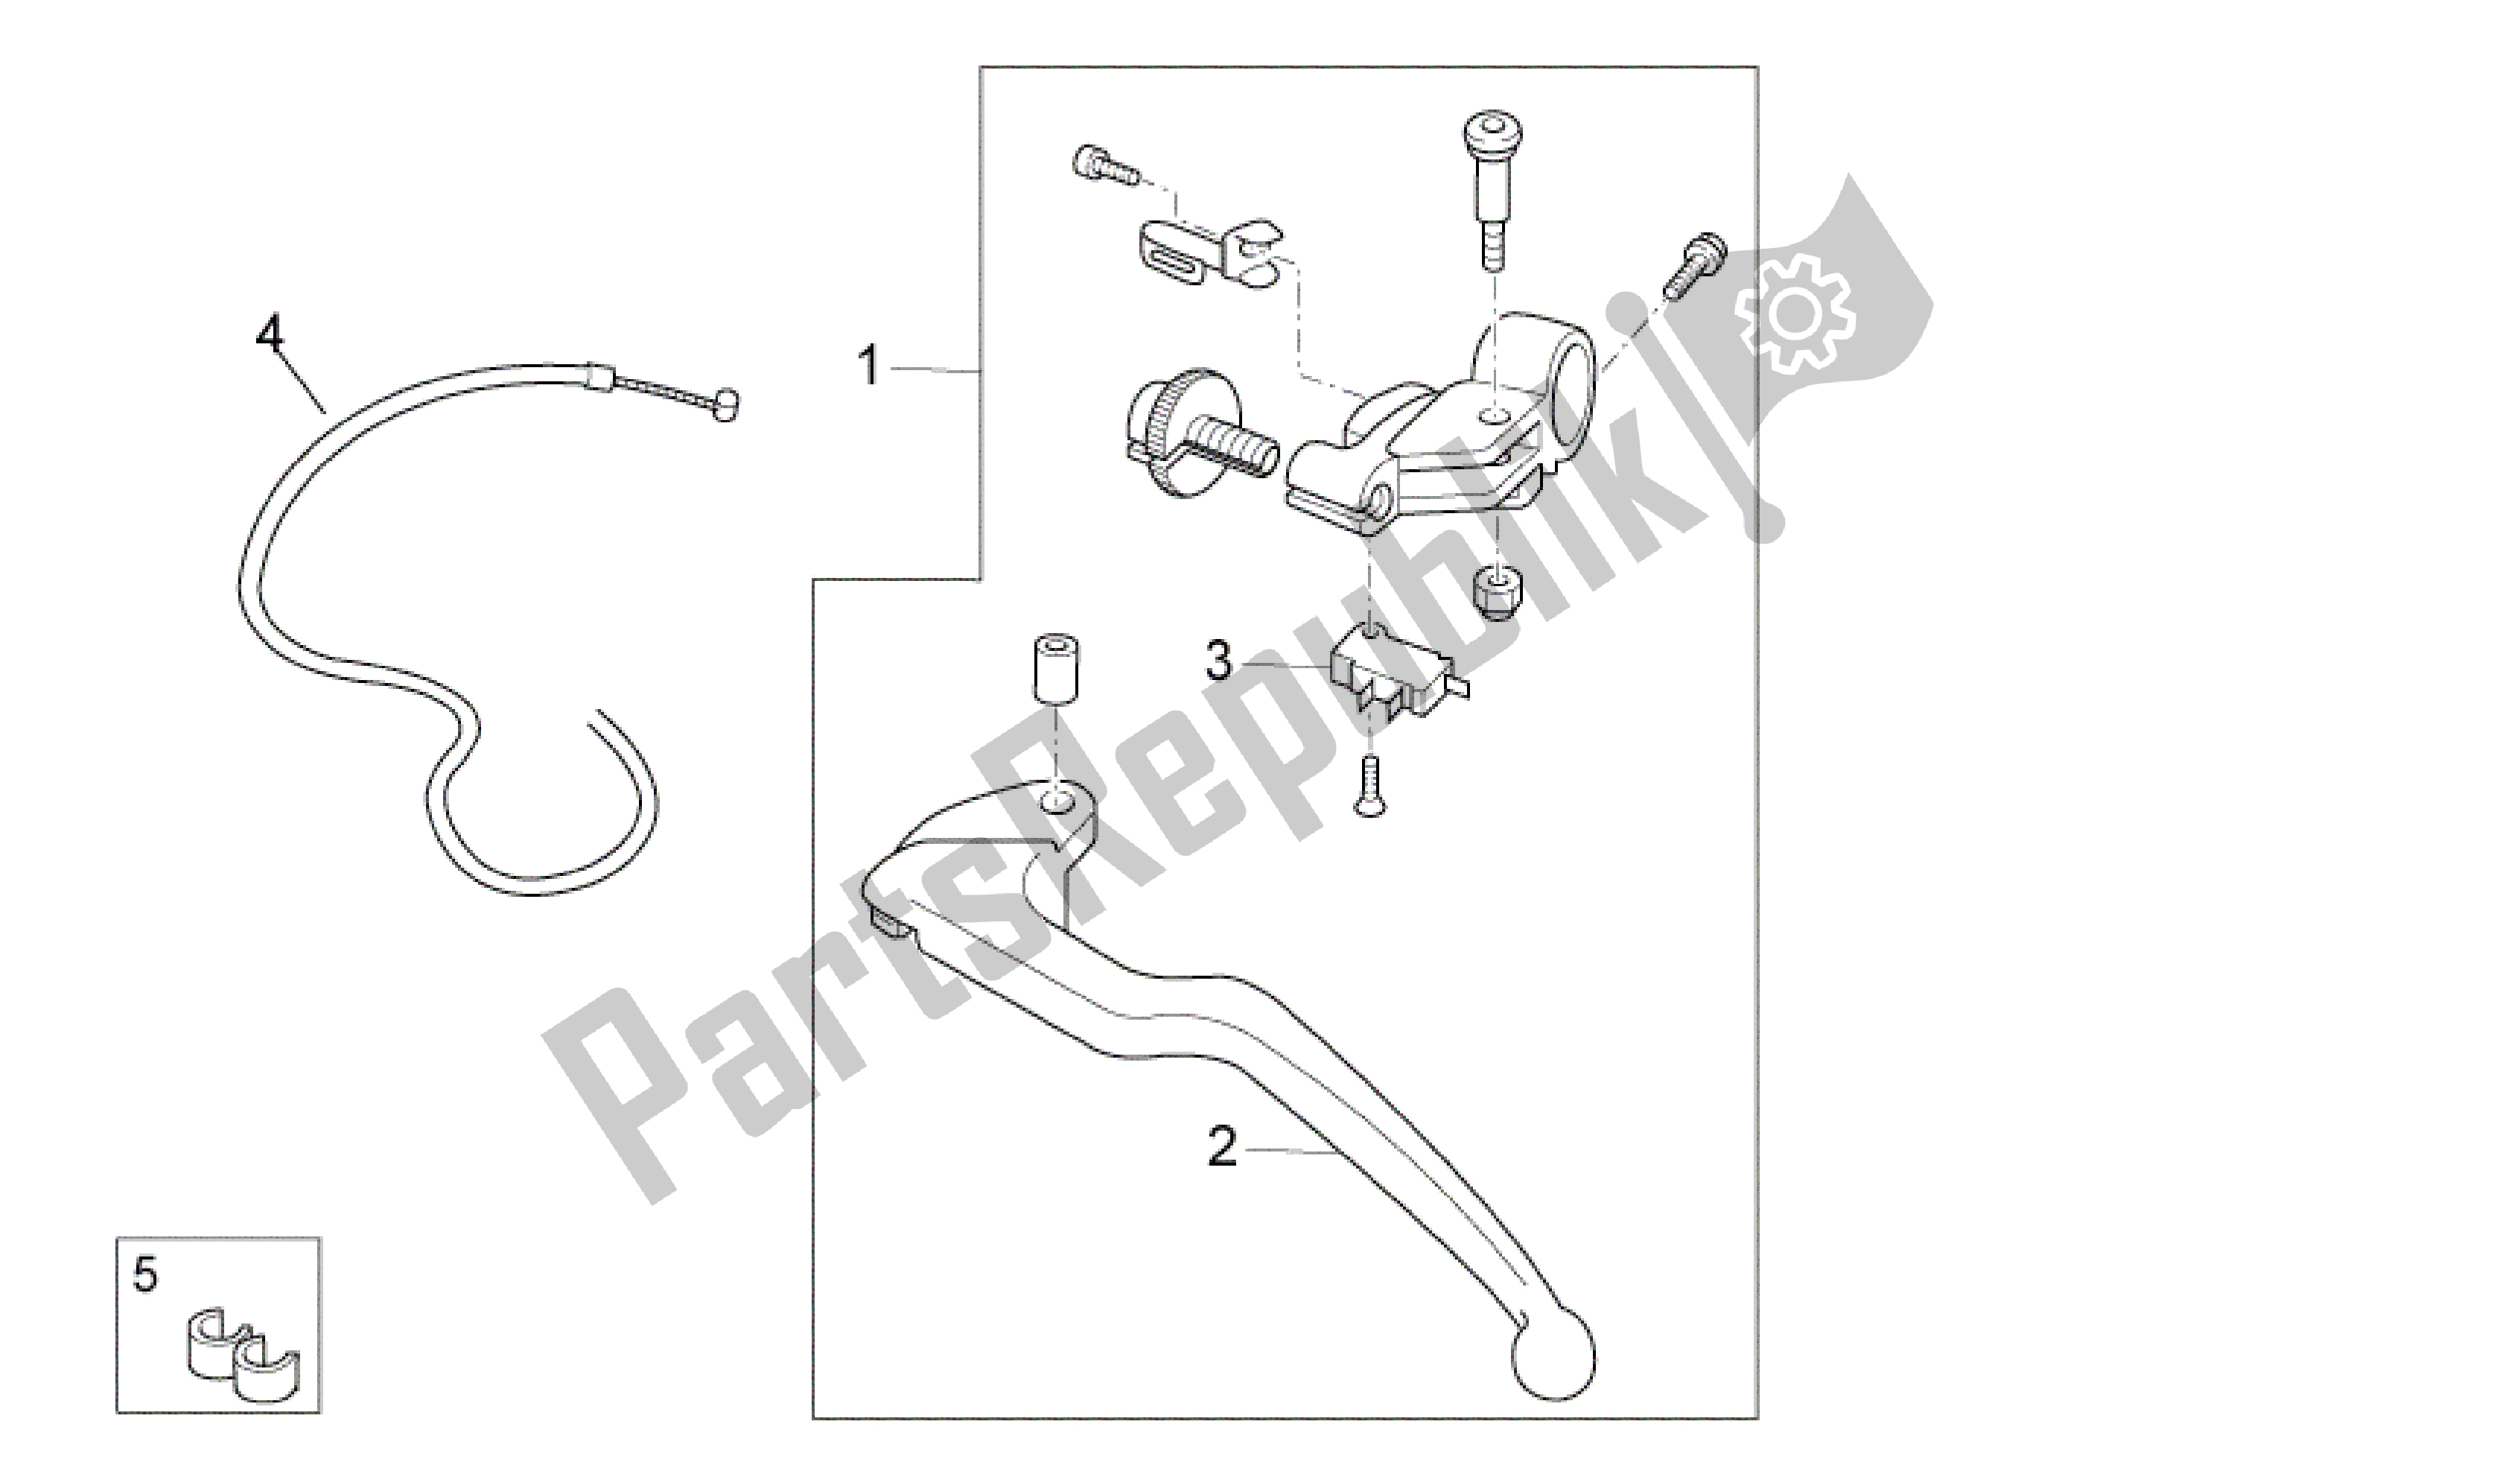 All parts for the Clutch Lever of the Aprilia RSV4 Aprc R ABS 3984 1000 2013